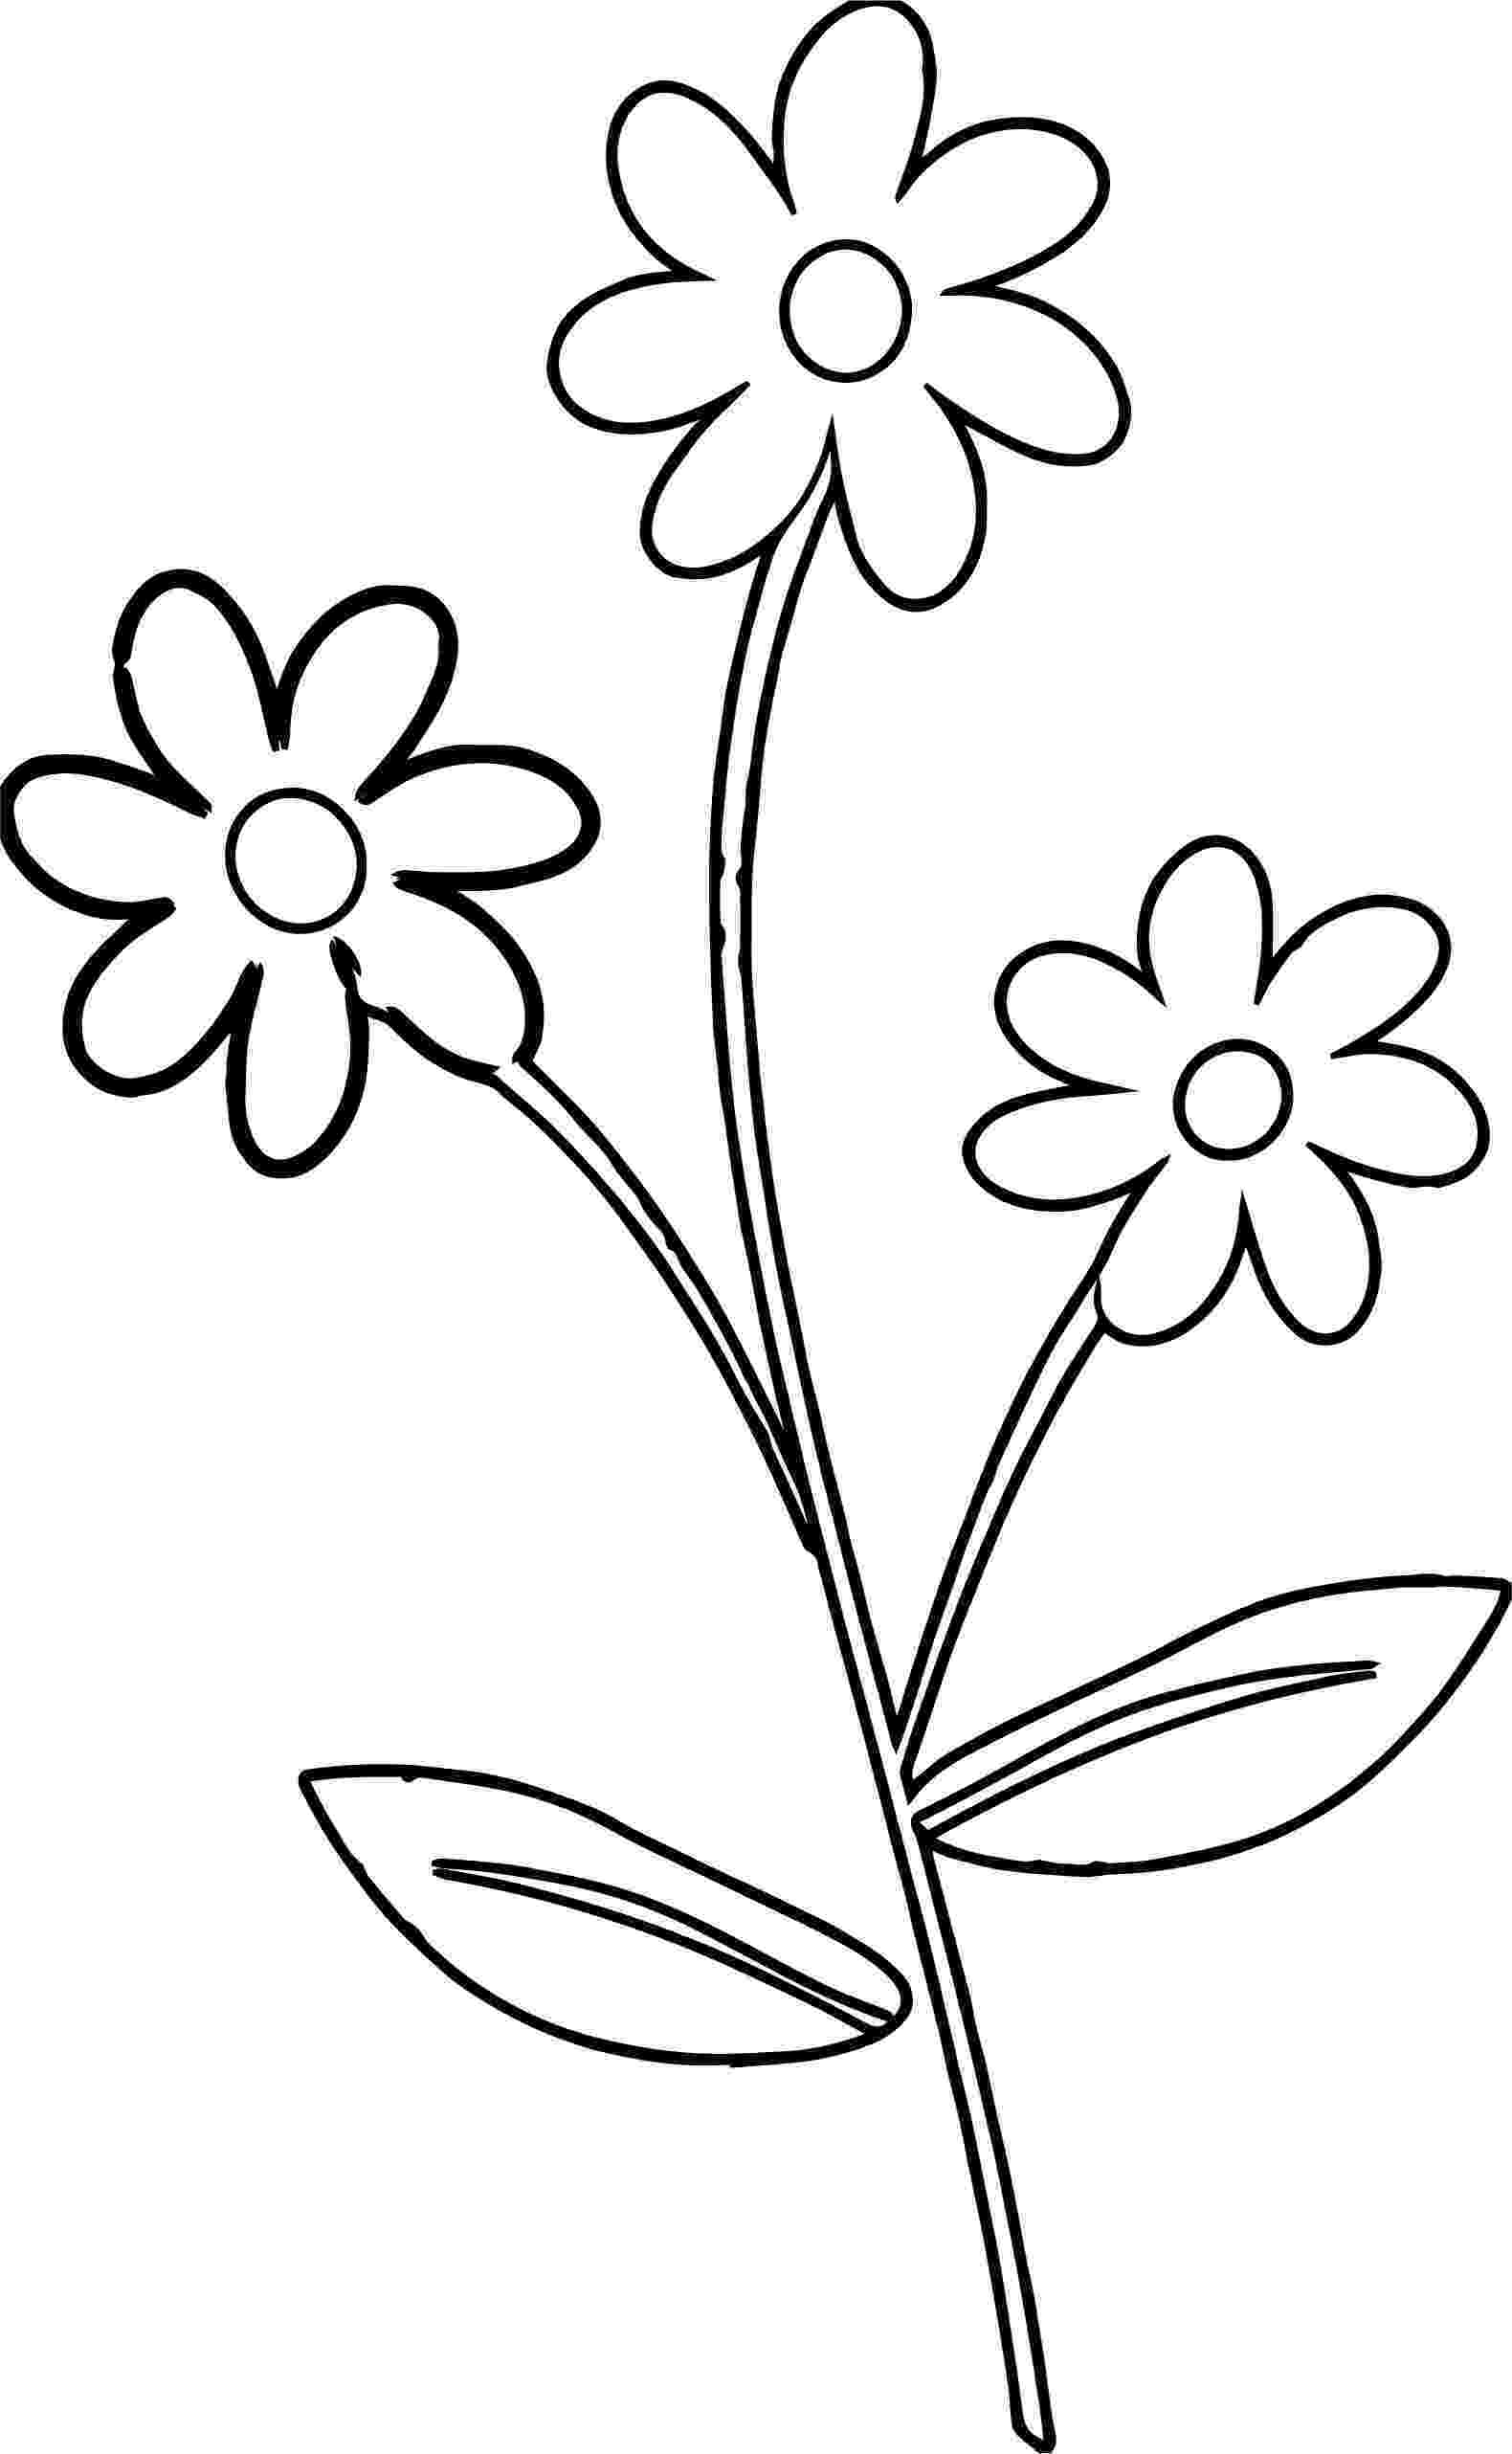 cute flower coloring pages cute flowers coloring pages pages coloring flower cute 